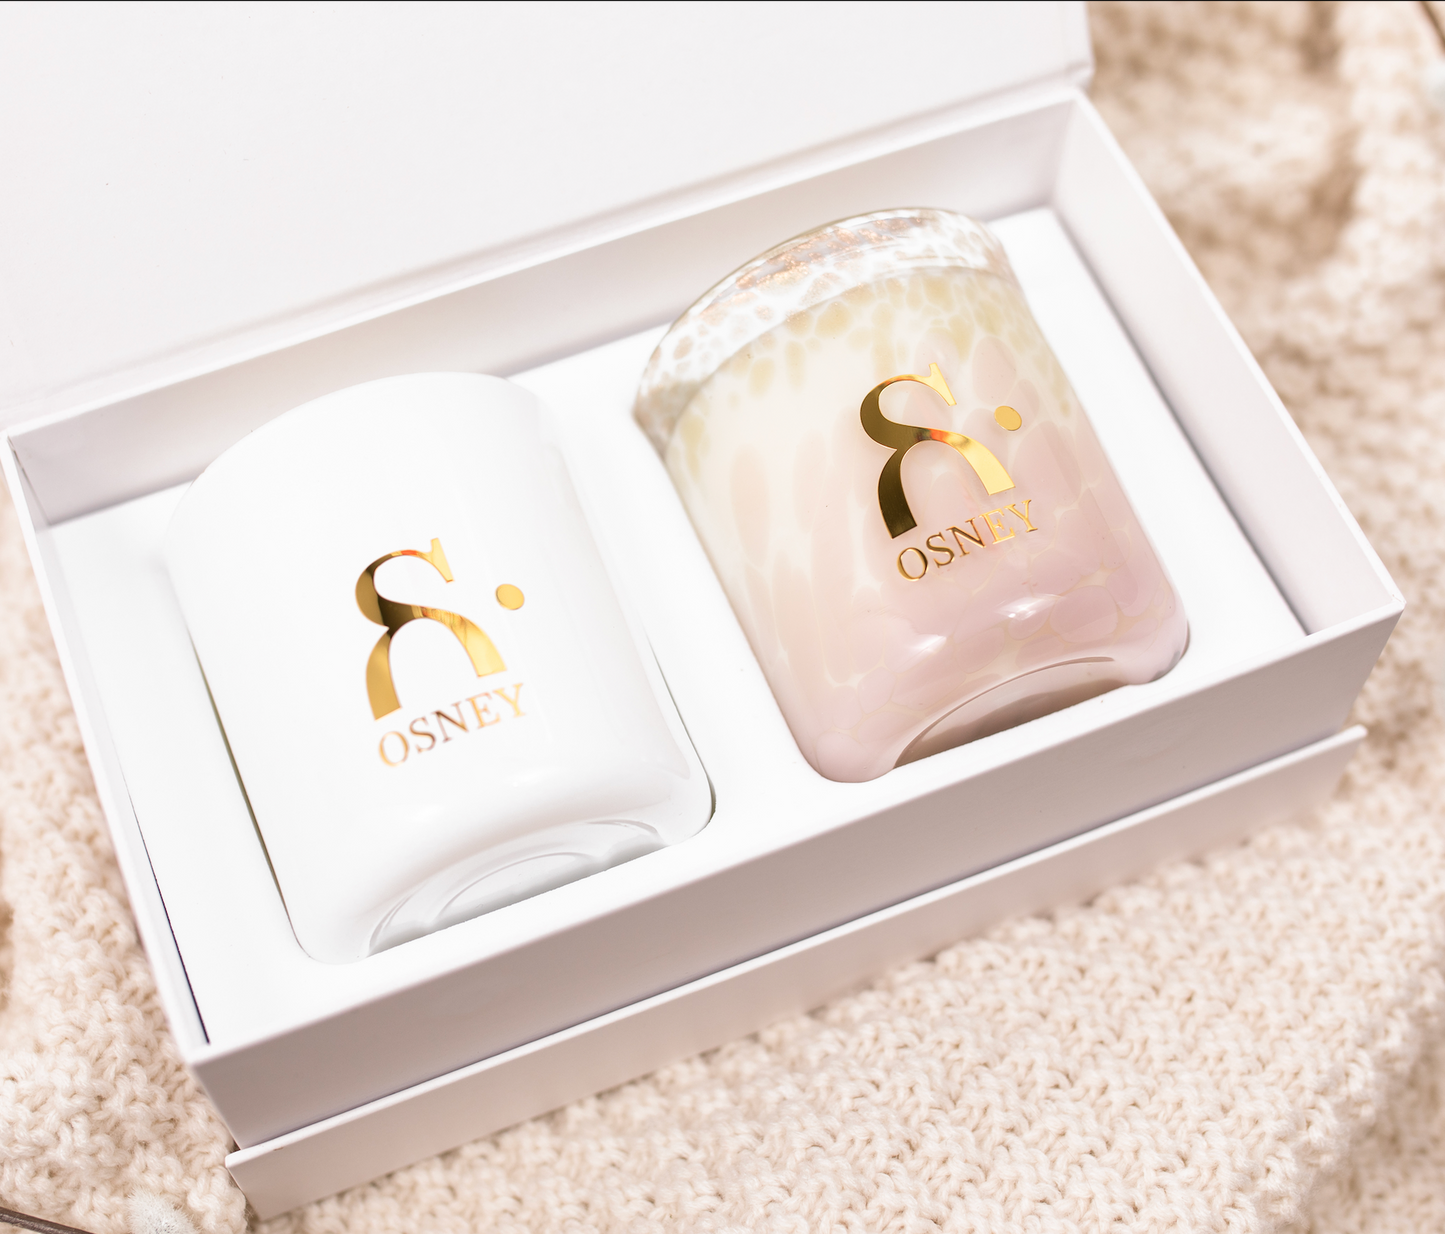 Duo Candle Gift set